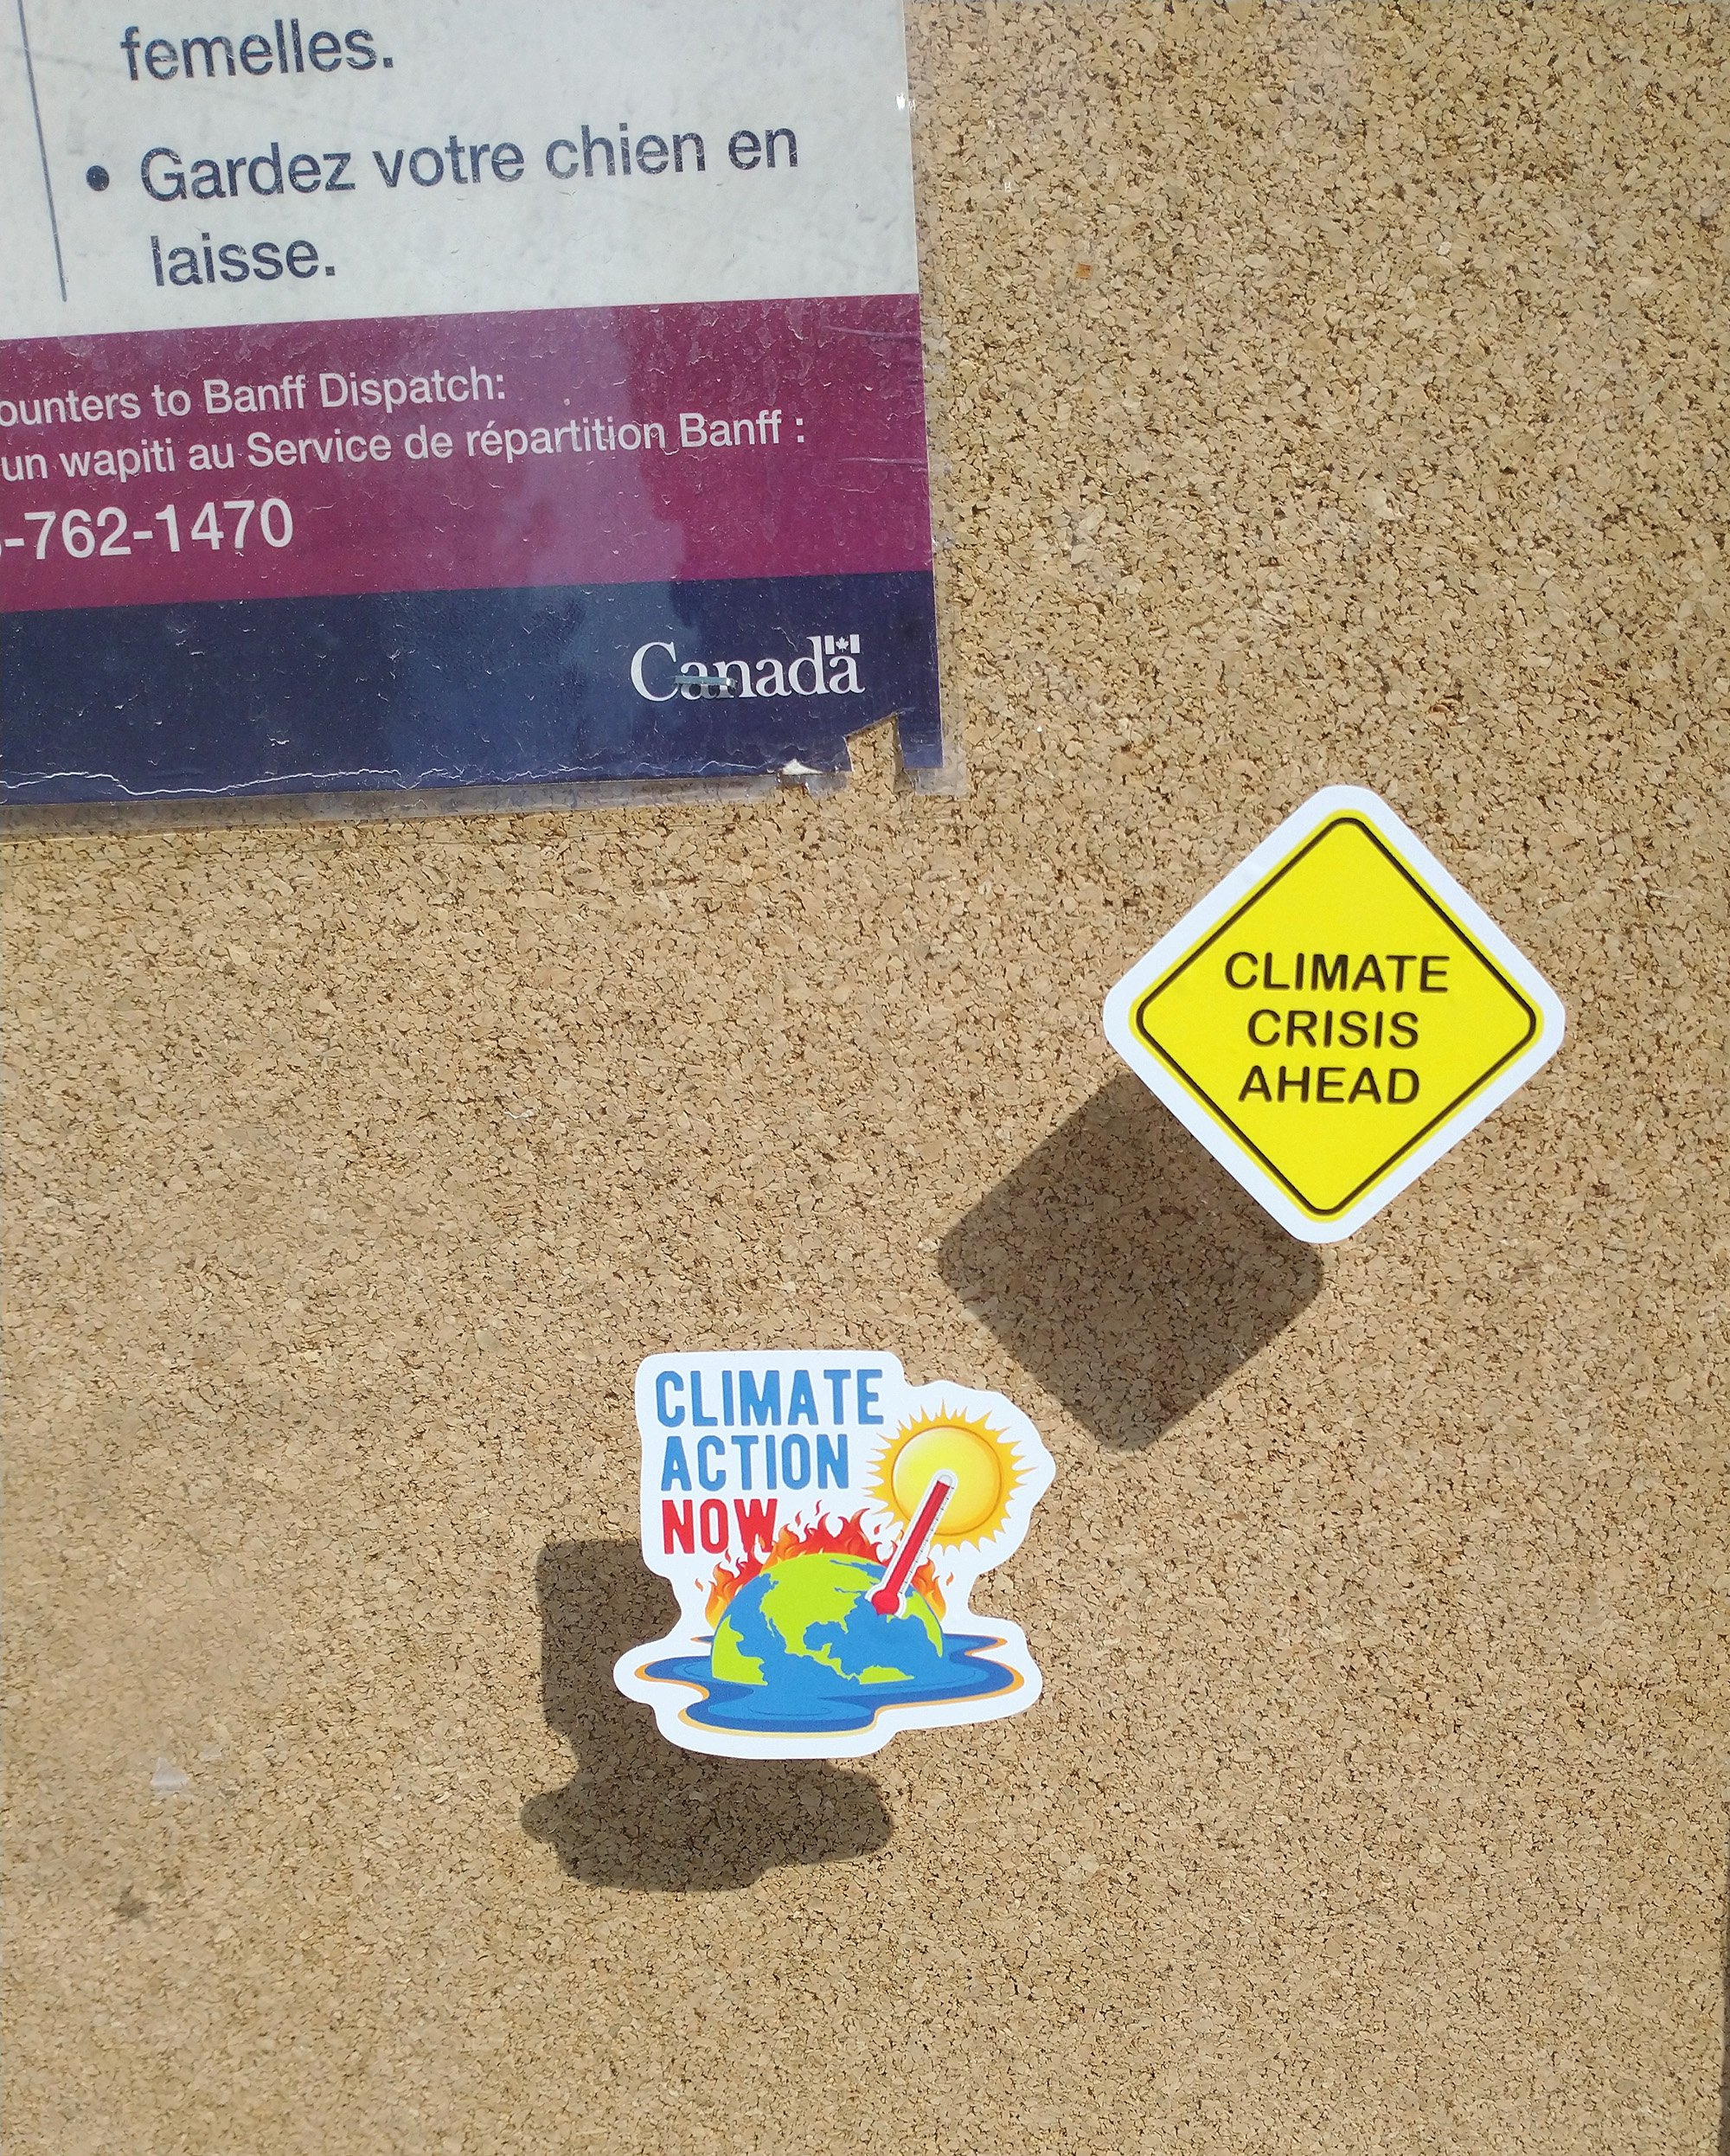 Fight climate change by flying out to Banff and putting little stickers on stuff! 